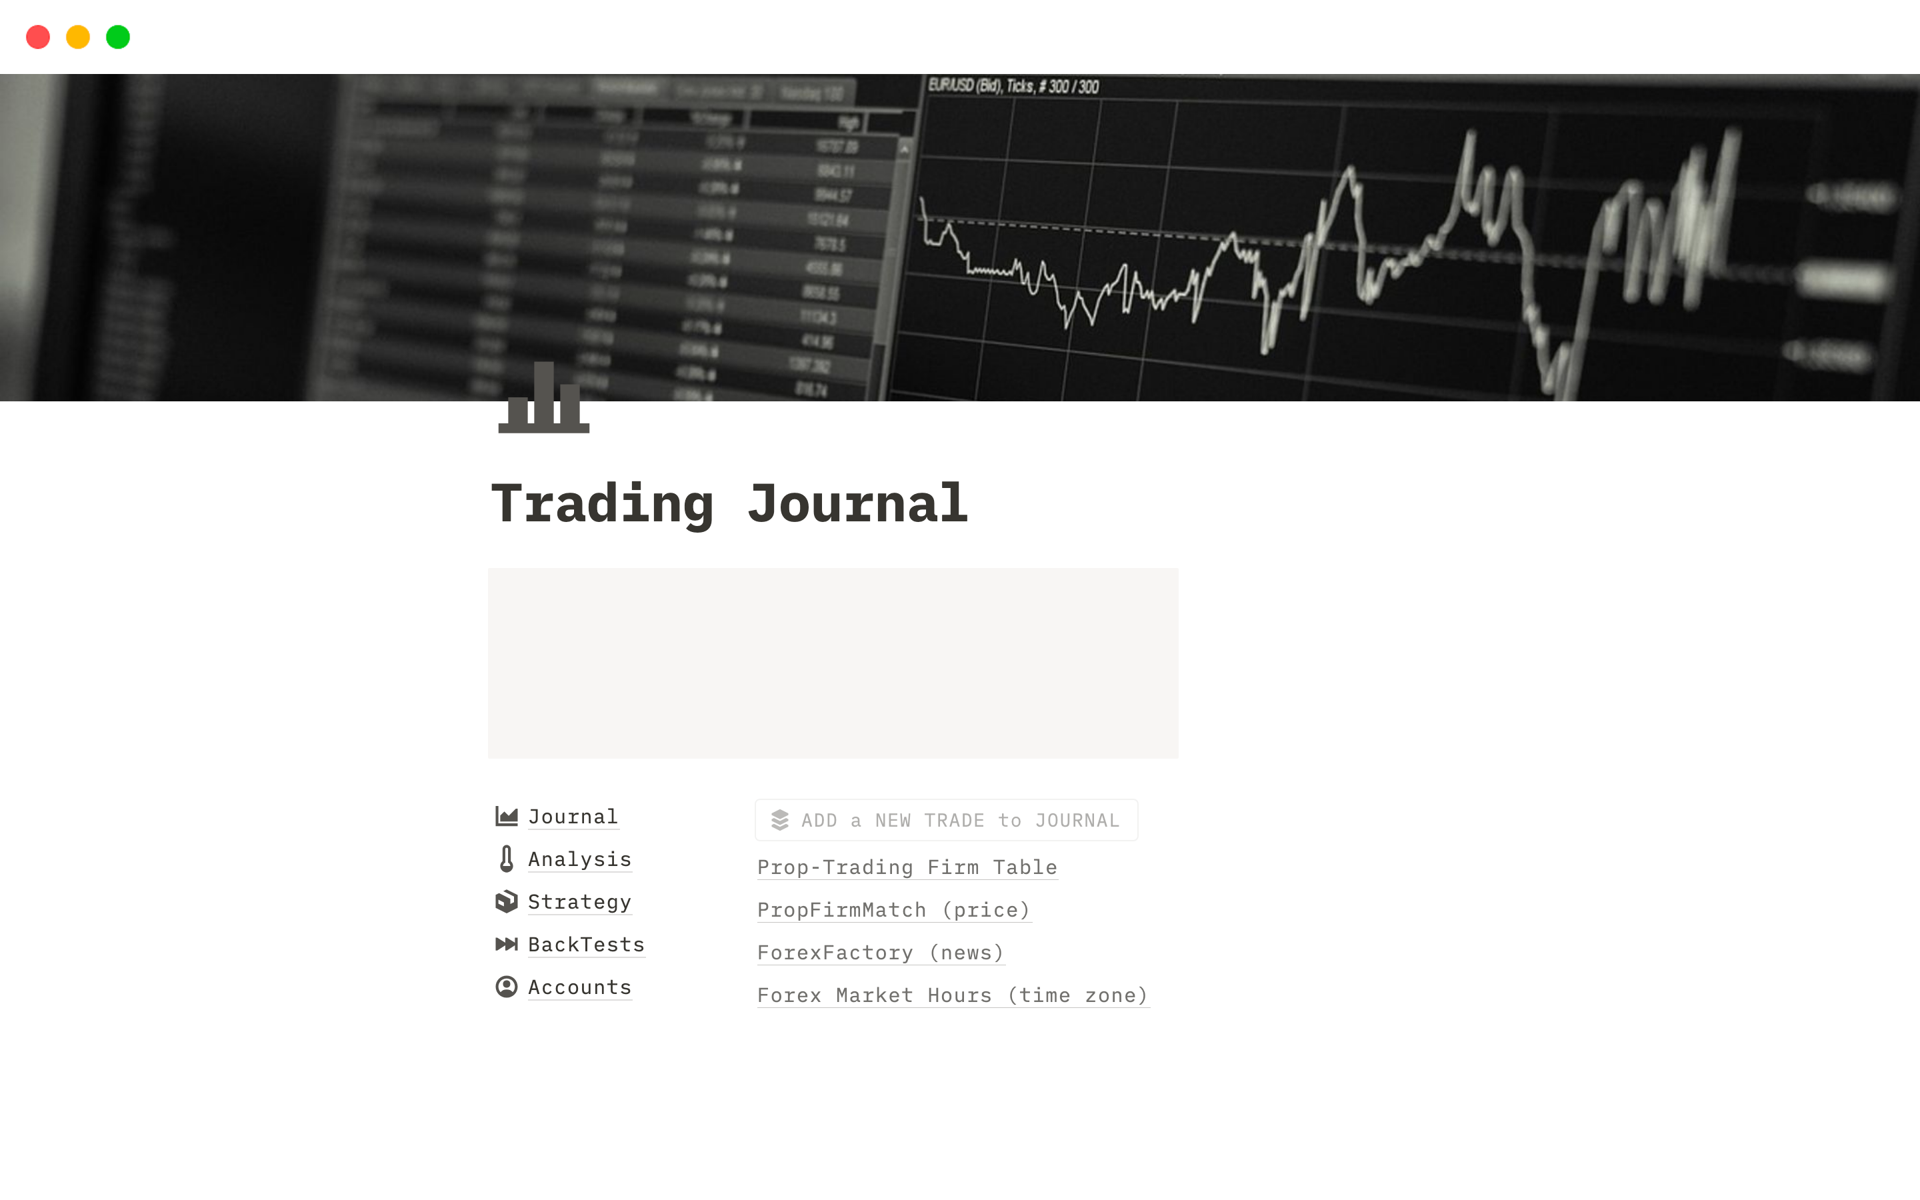 Simple trading Journal, to master your skills. Strategy, Daily Analysis and Main Page. Easy to use and understand, user friendly.